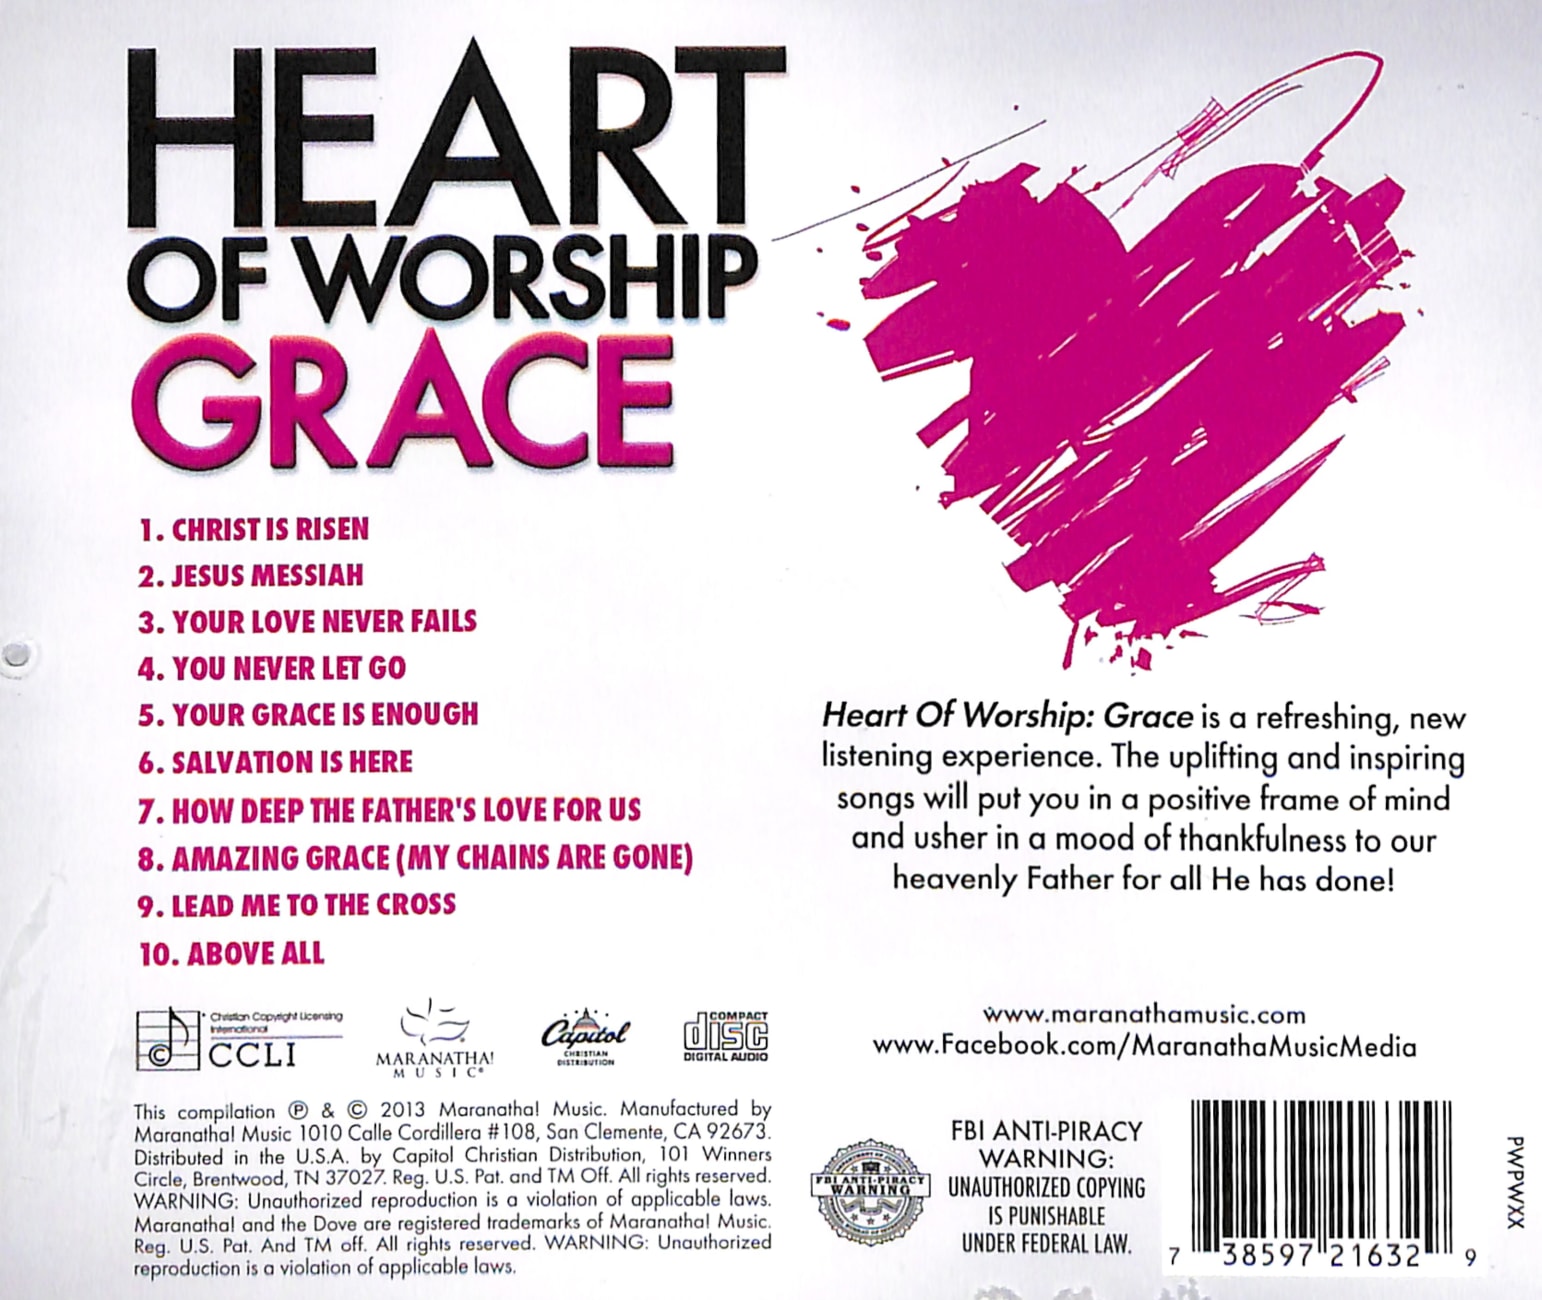 Ccli Heart of Worship - Grace (Heart Of Worship Series) Compact Disk